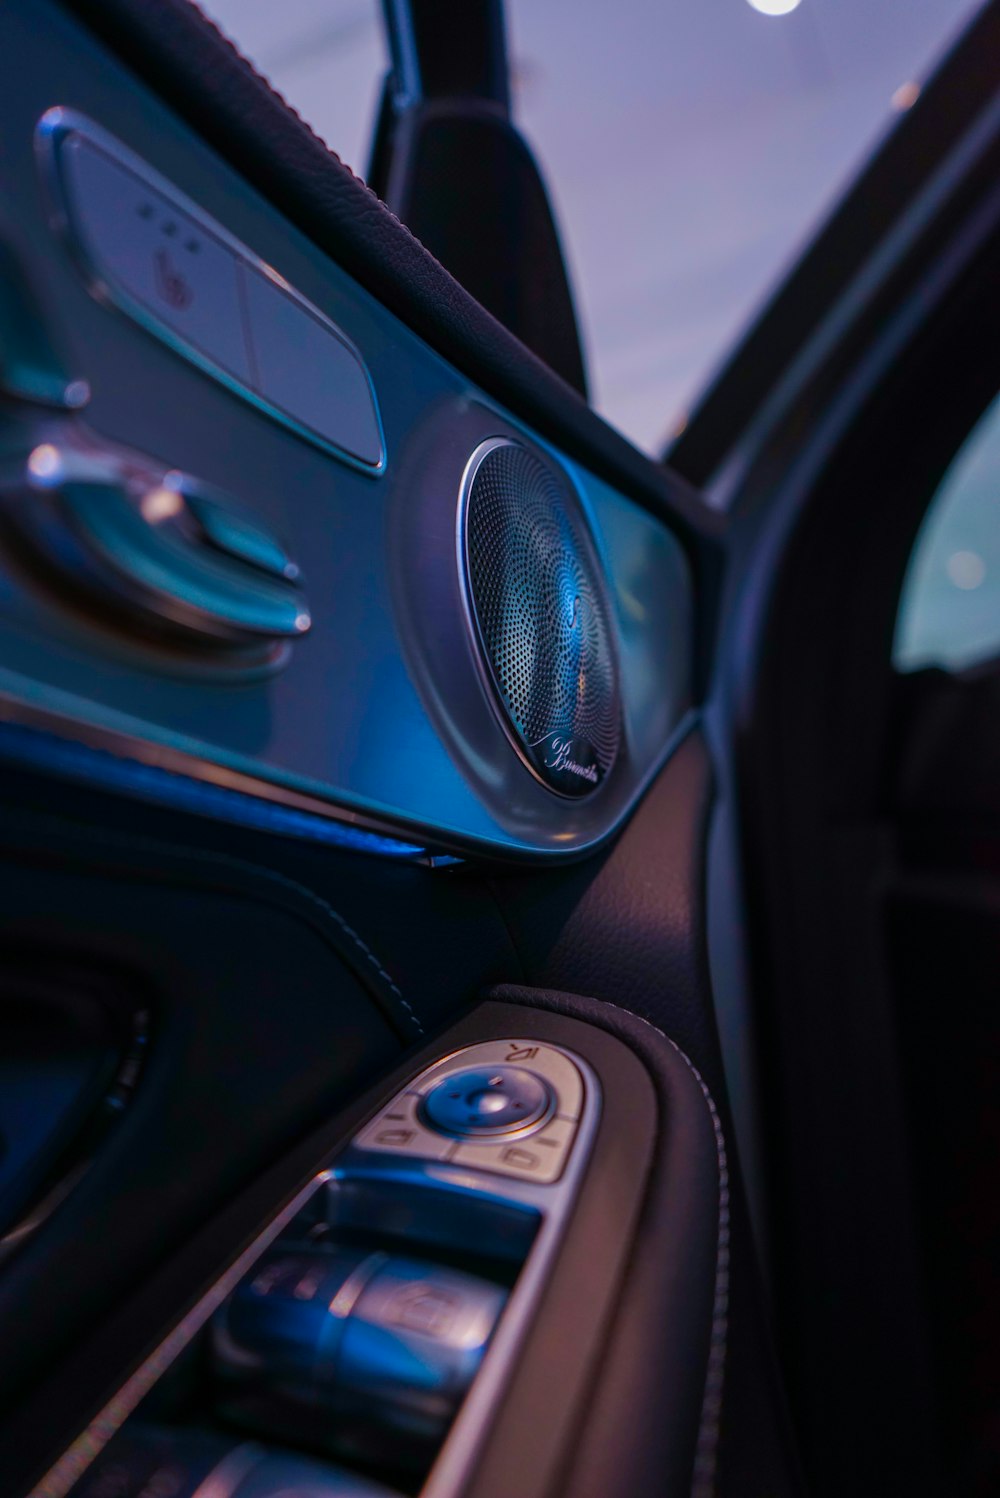 a close up of a car dashboard with a radio